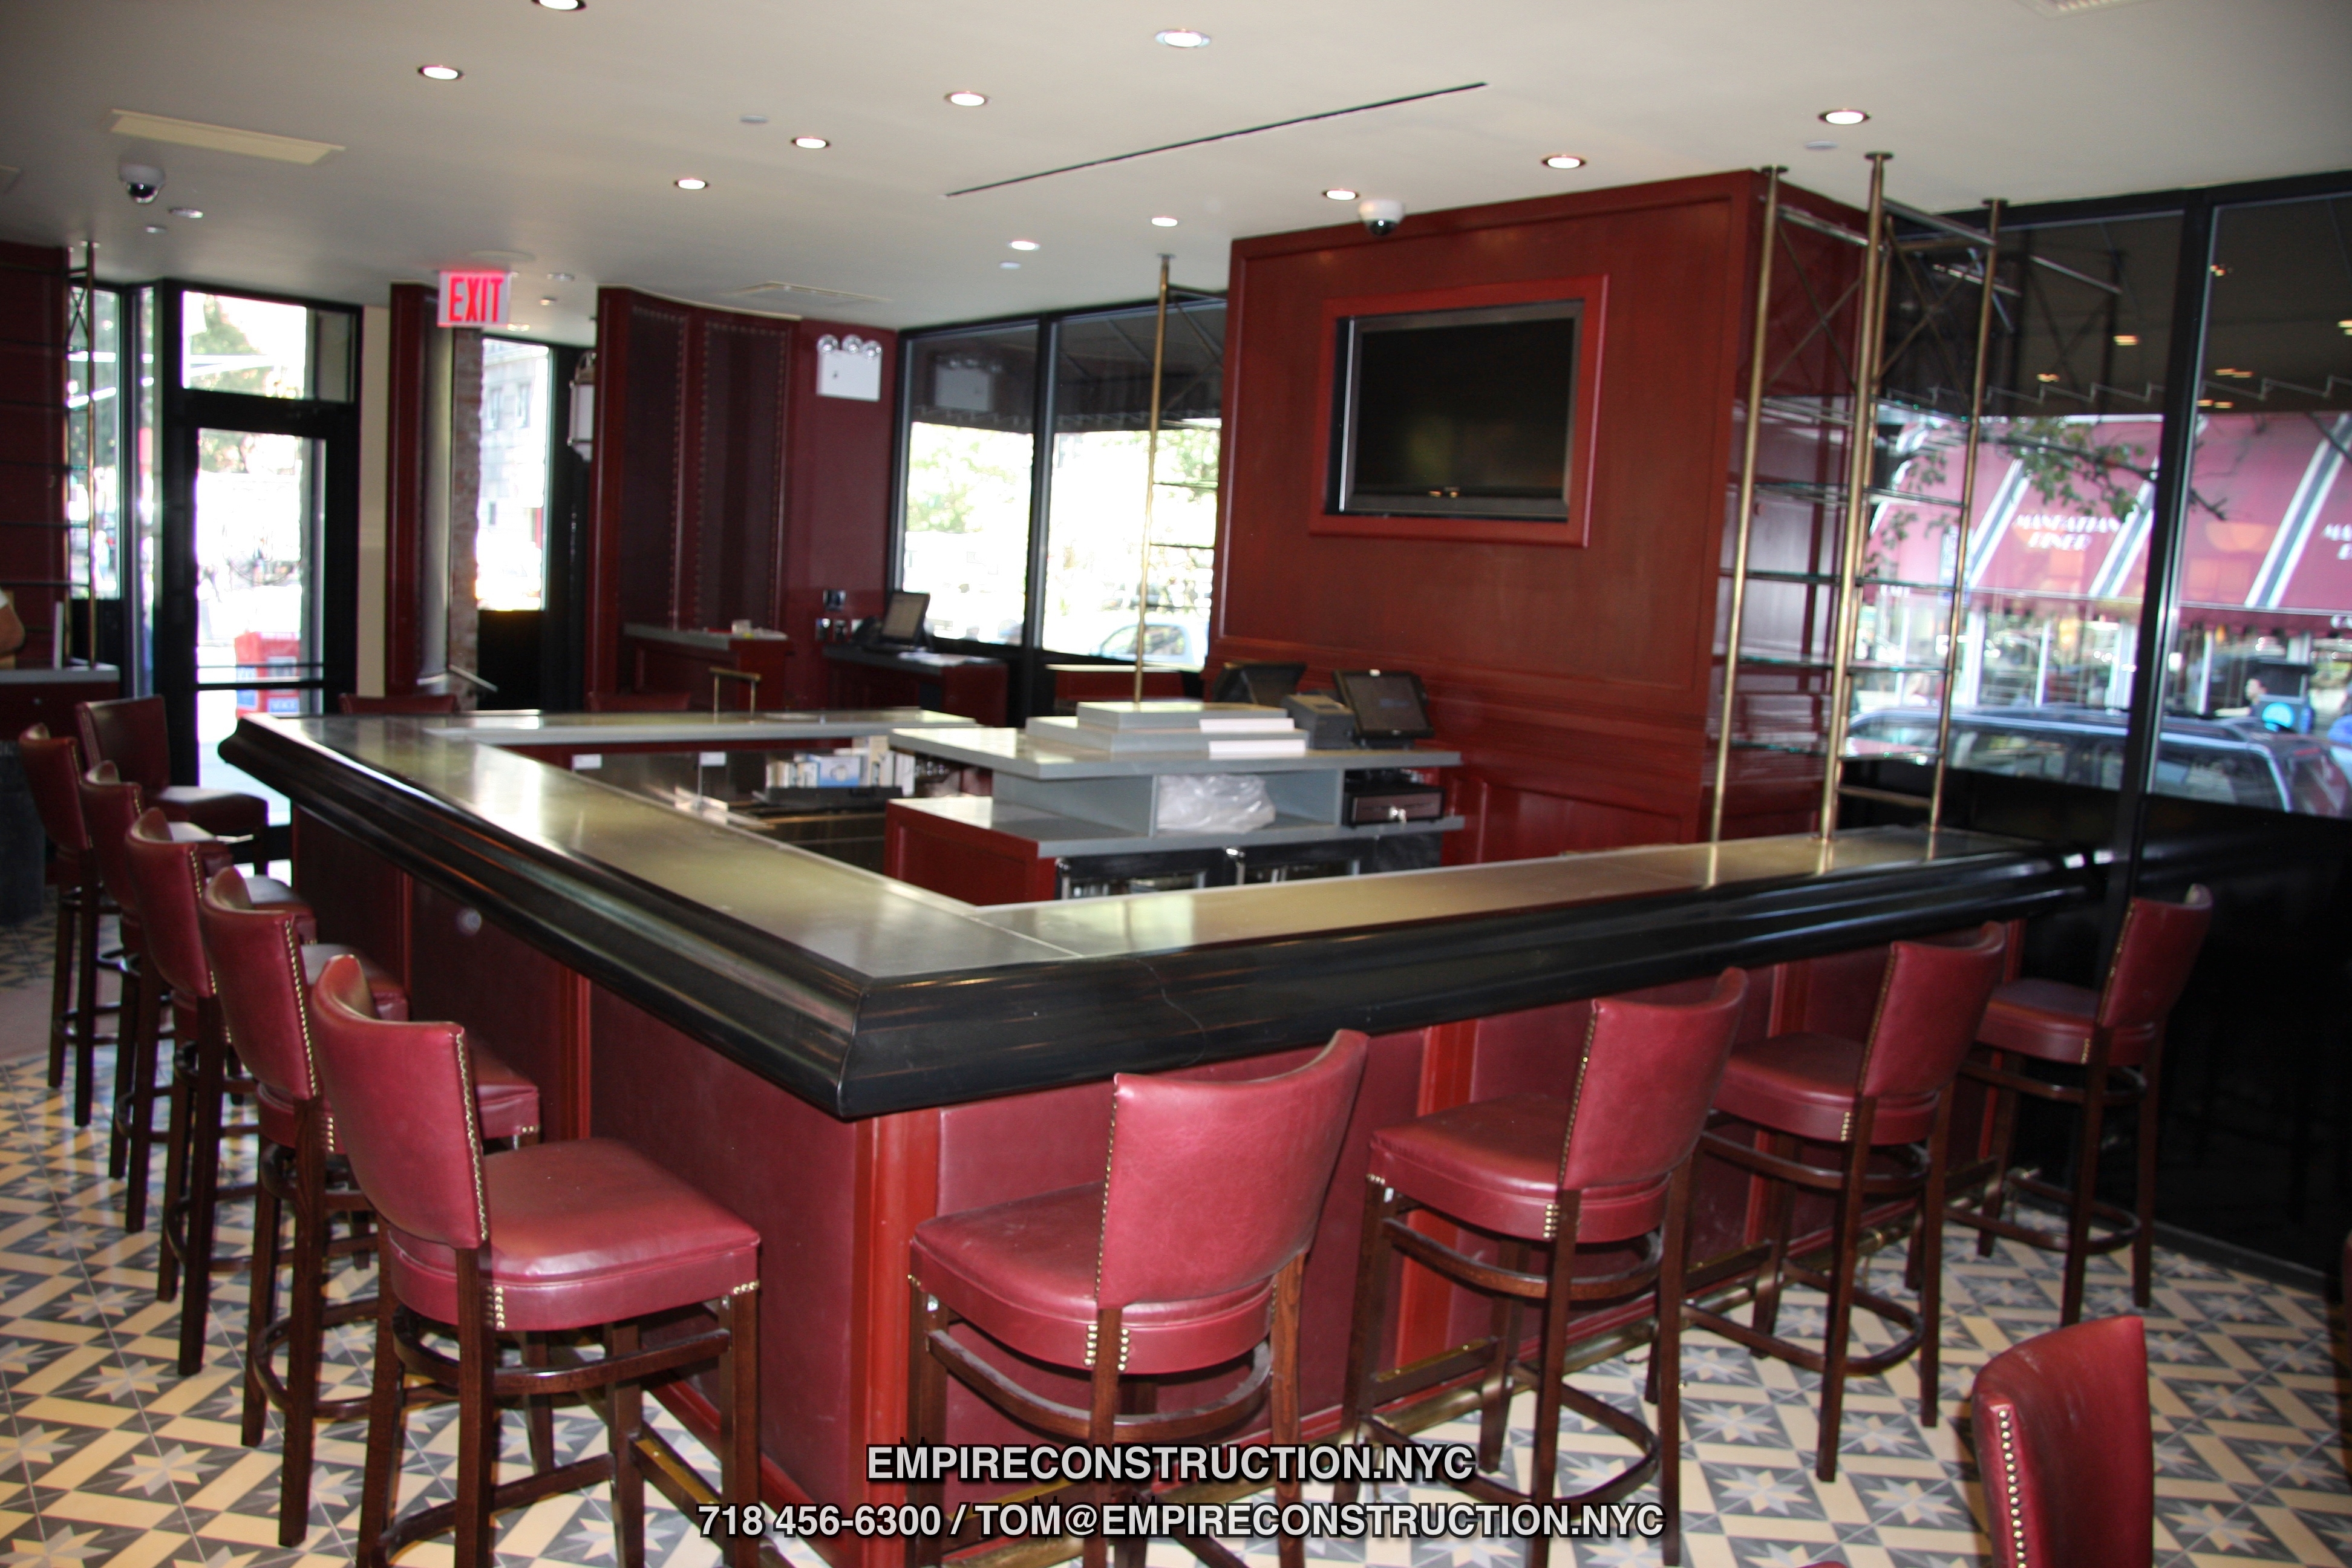 We do custom bars,  furniture and cabinets, maitre D stands, waiter stations, wine storages, custom commercial kitchens, decorative columns, vestiubles, shelves, racks, tables, chairs, storage closets, build ins, paneling, countertops, lighting design, low voltage wirening,  register and computer station set up, video security and fire alarms, wall and floor structures and any other elements that go into bar and restaurant building. 